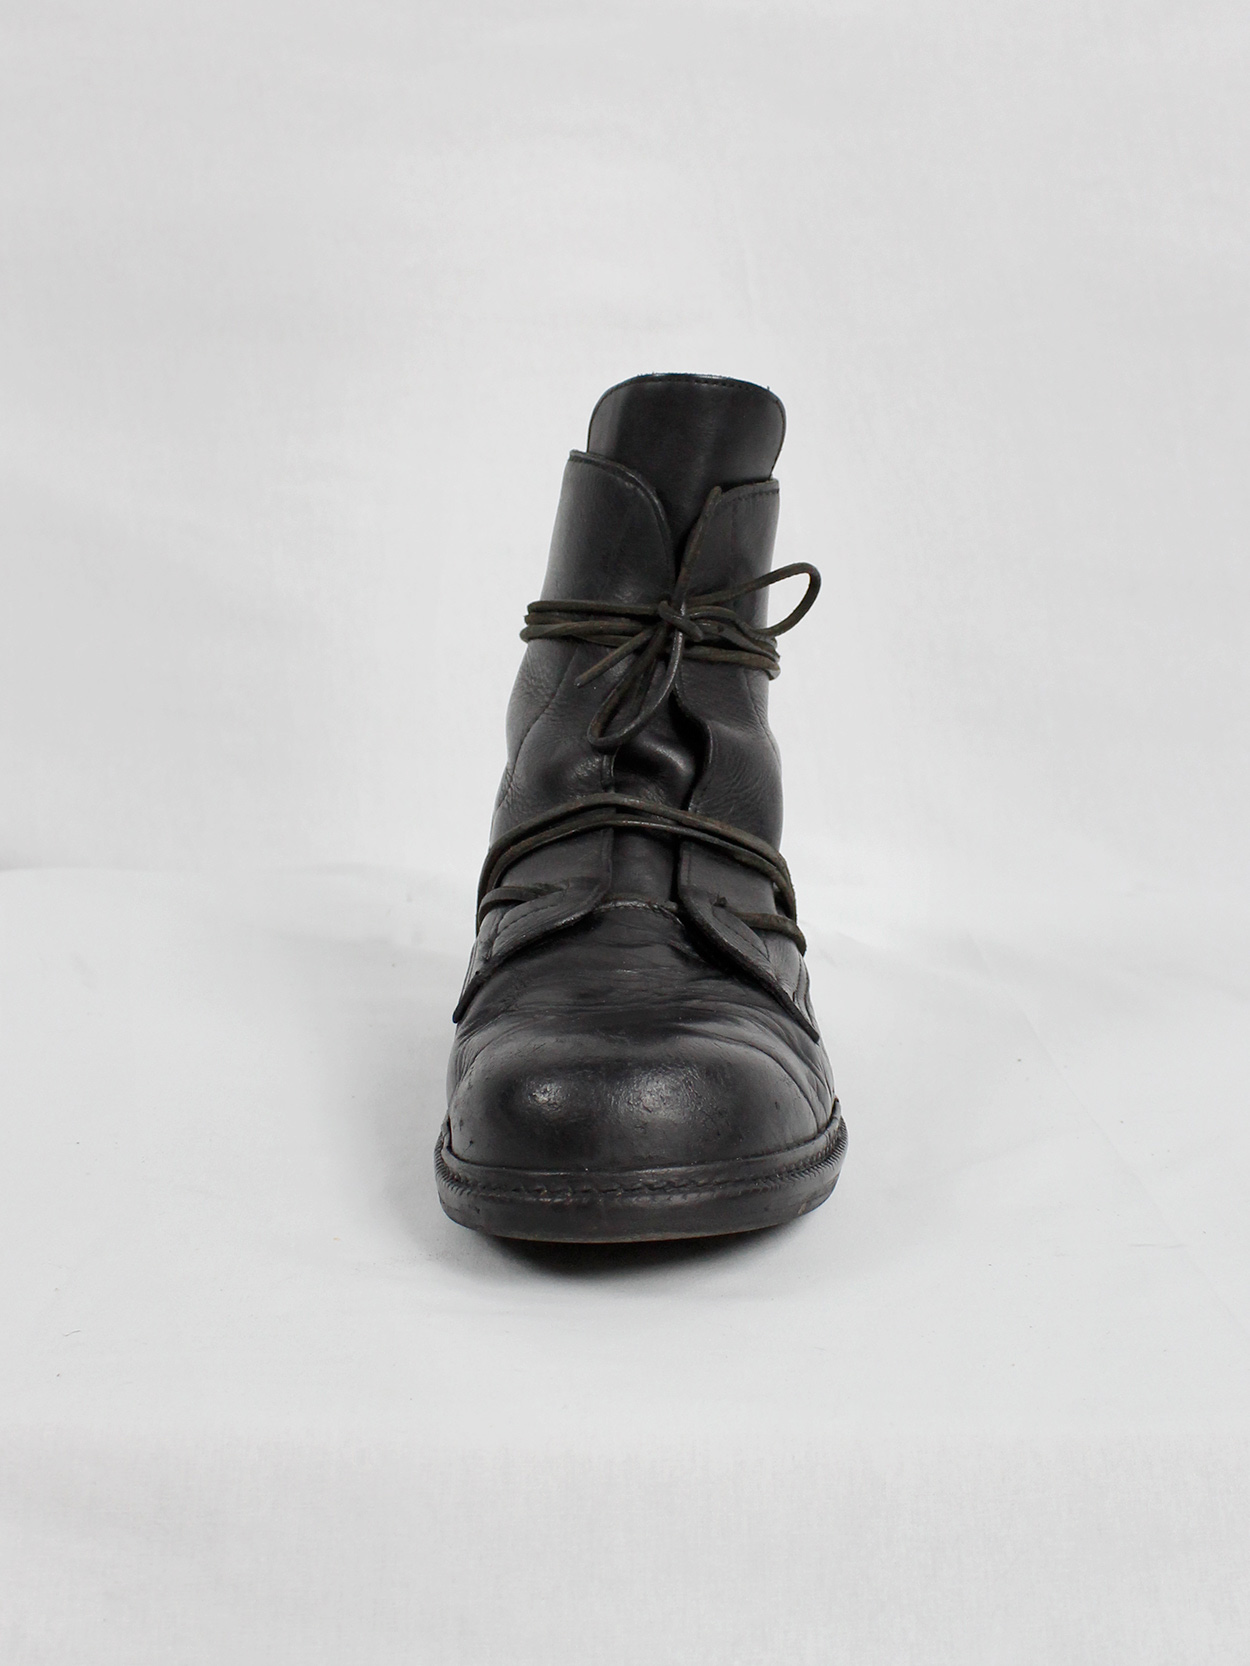 Dirk Bikkembergs black tall boots with laces through the soles 1990s 90s (9)